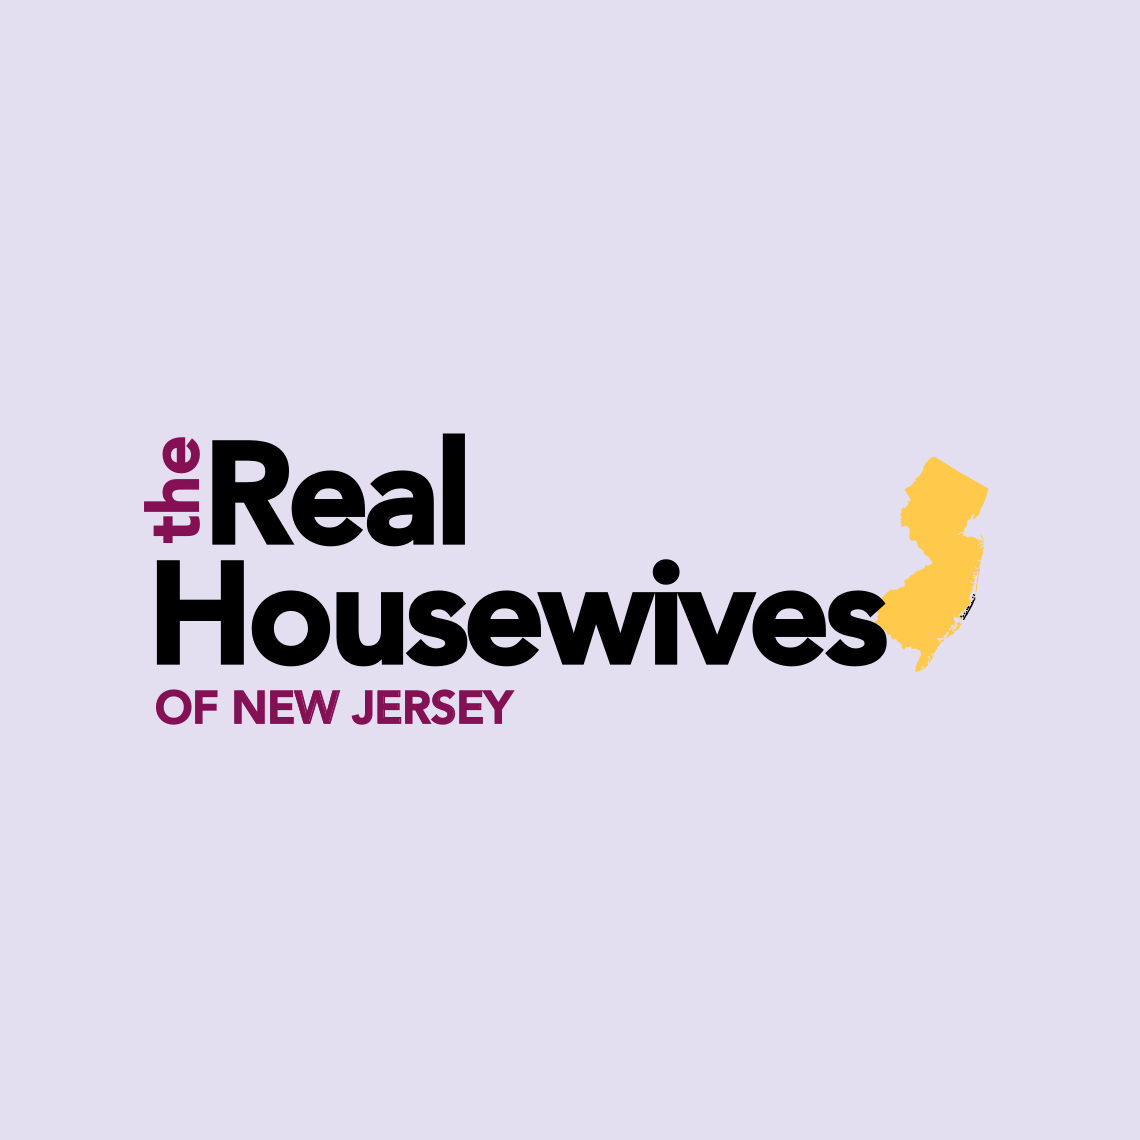 Meet the cast of The Real Housewives of New Jersey season 9!